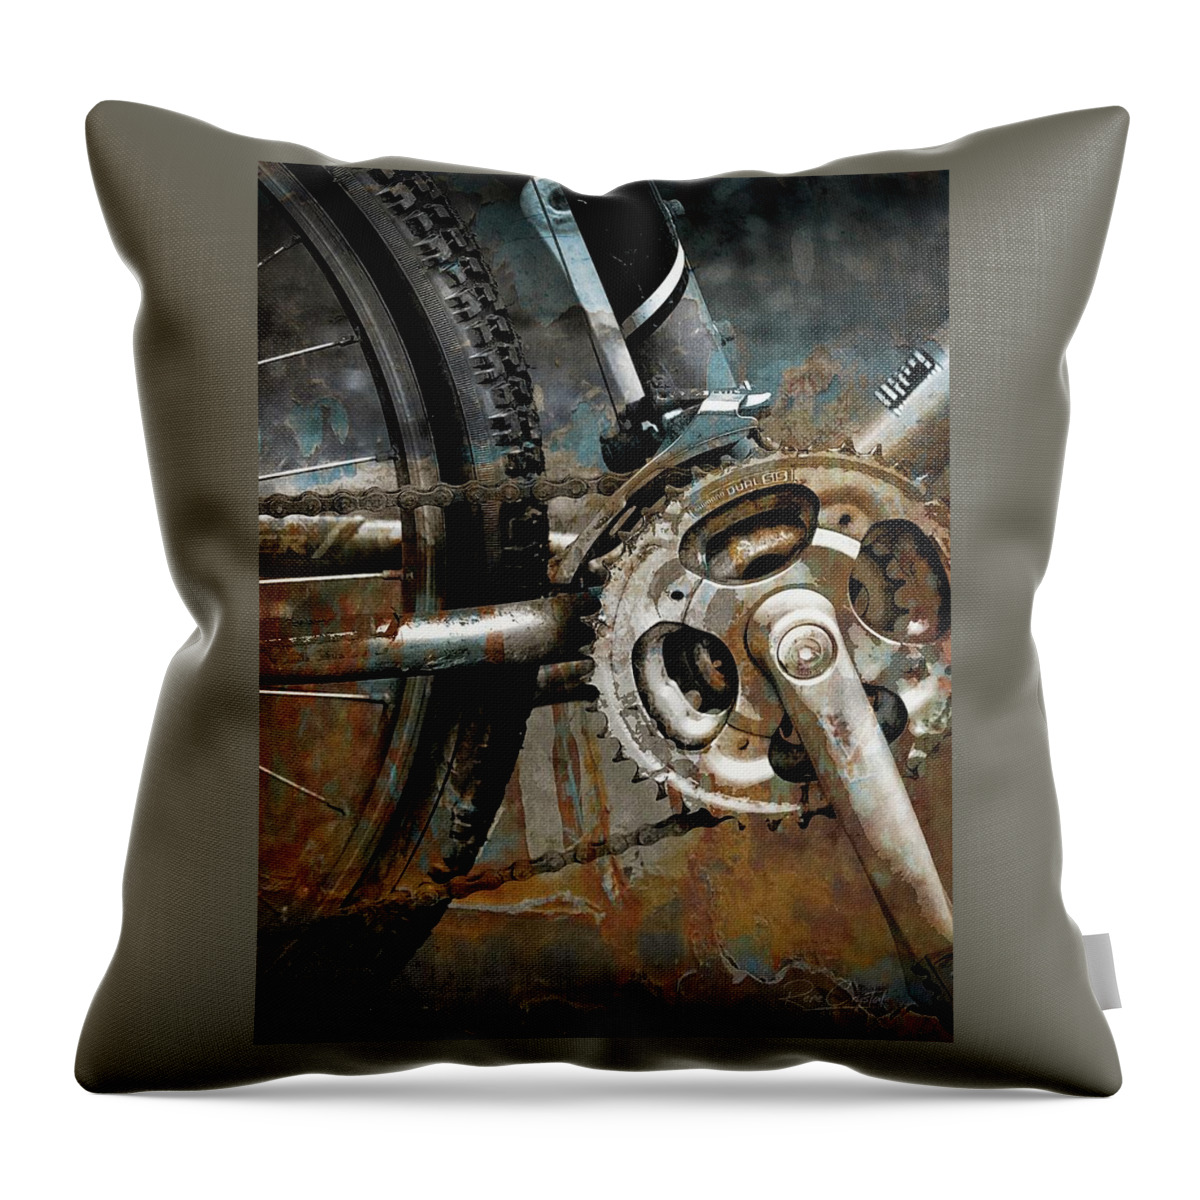 Bike Throw Pillow featuring the photograph Rusty But Ready by Rene Crystal